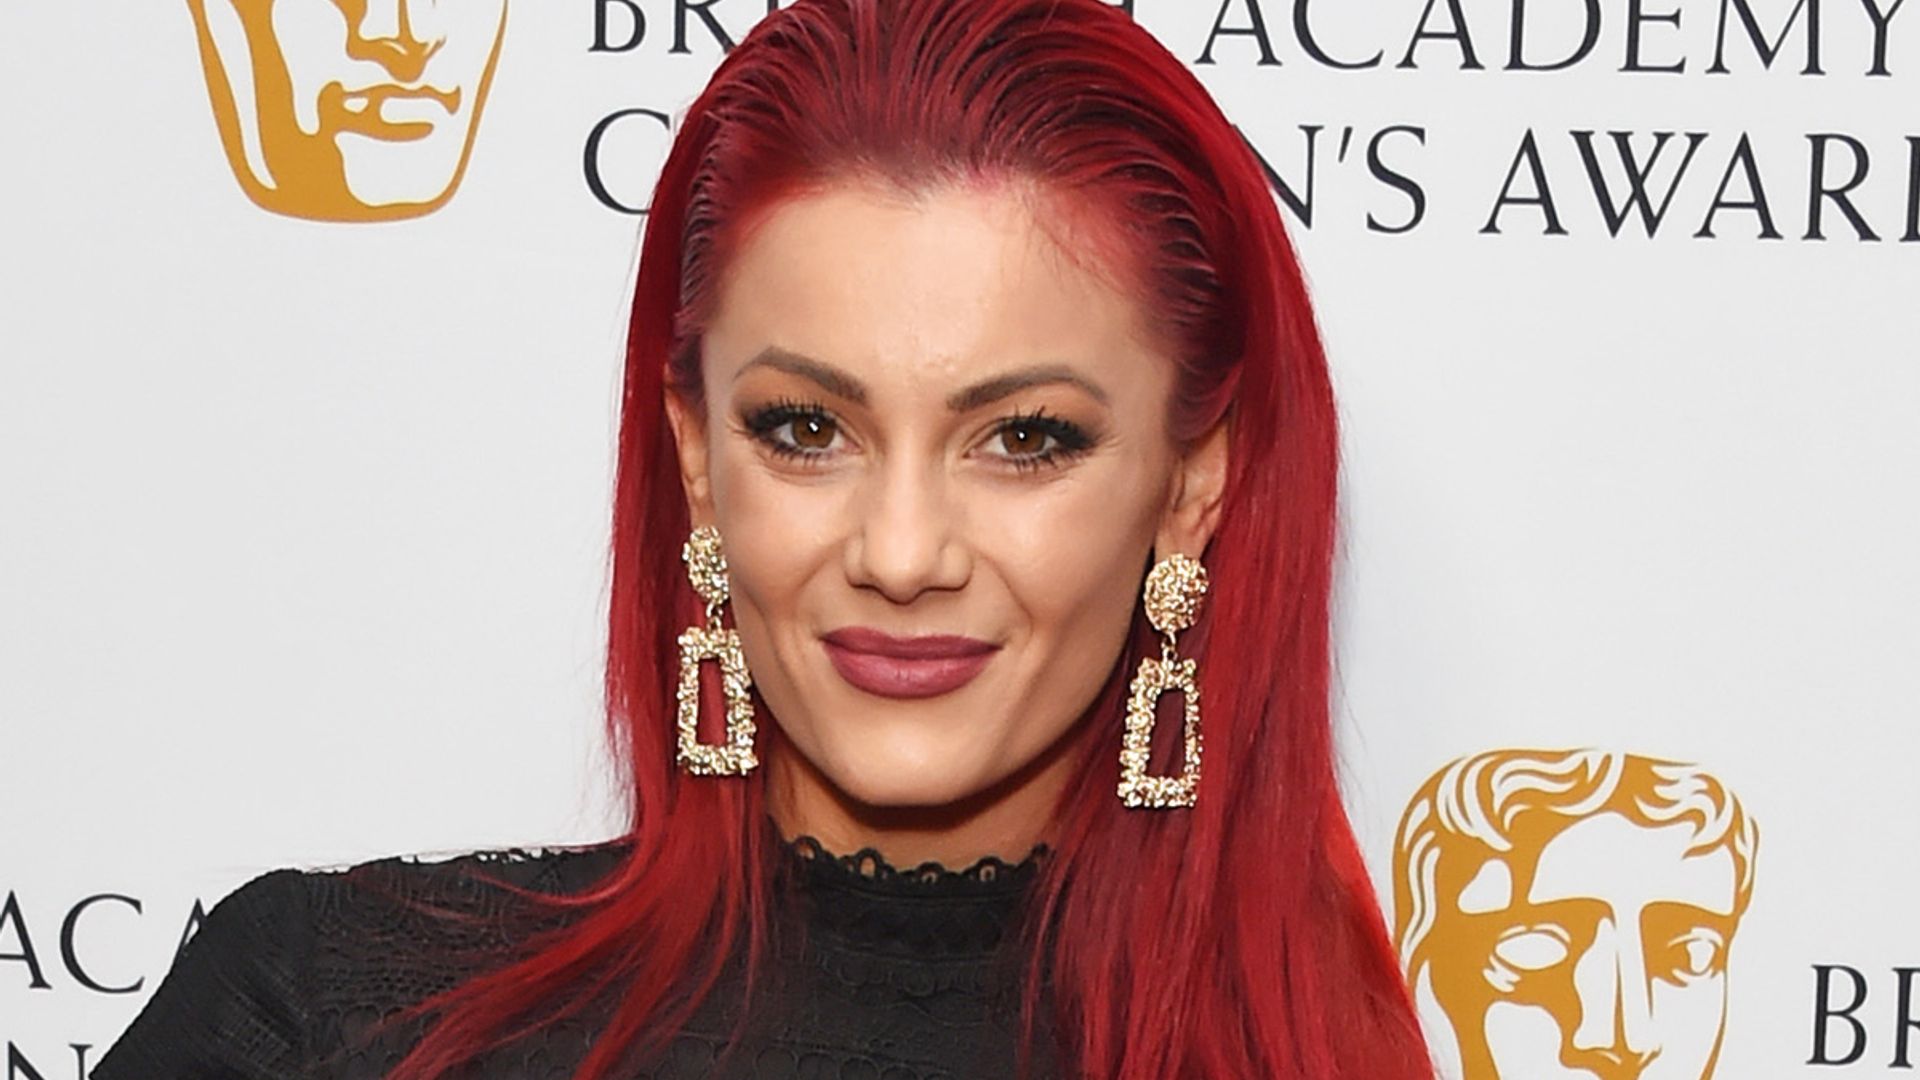 Strictly Star Dianne Buswell Debuts Stunning Hair Transformation See